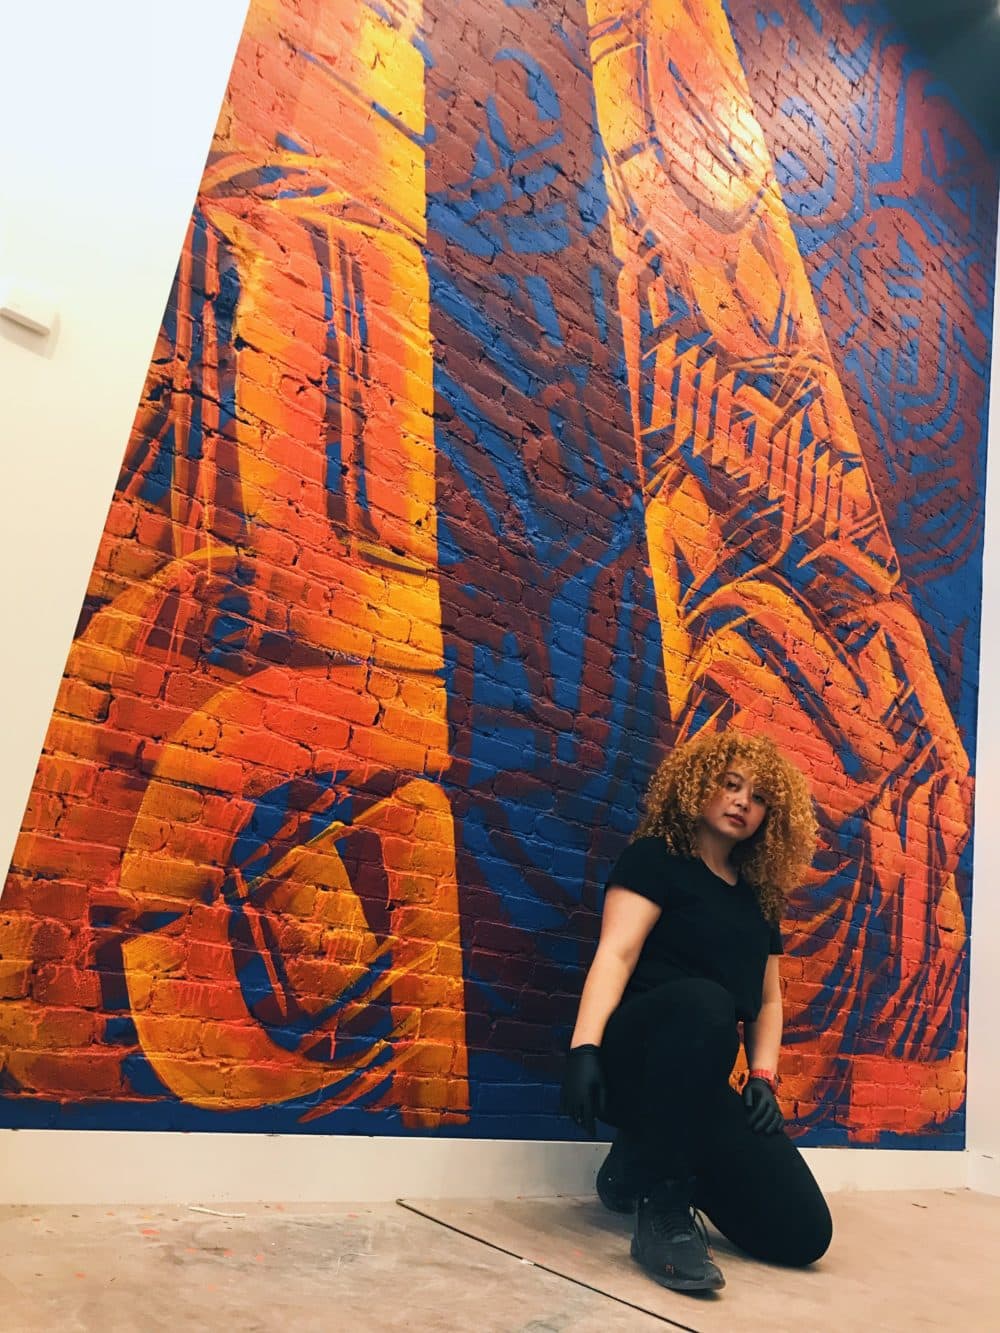 Artist Sneha Shrestha in front of one of her murals. (Courtesy of the artist)